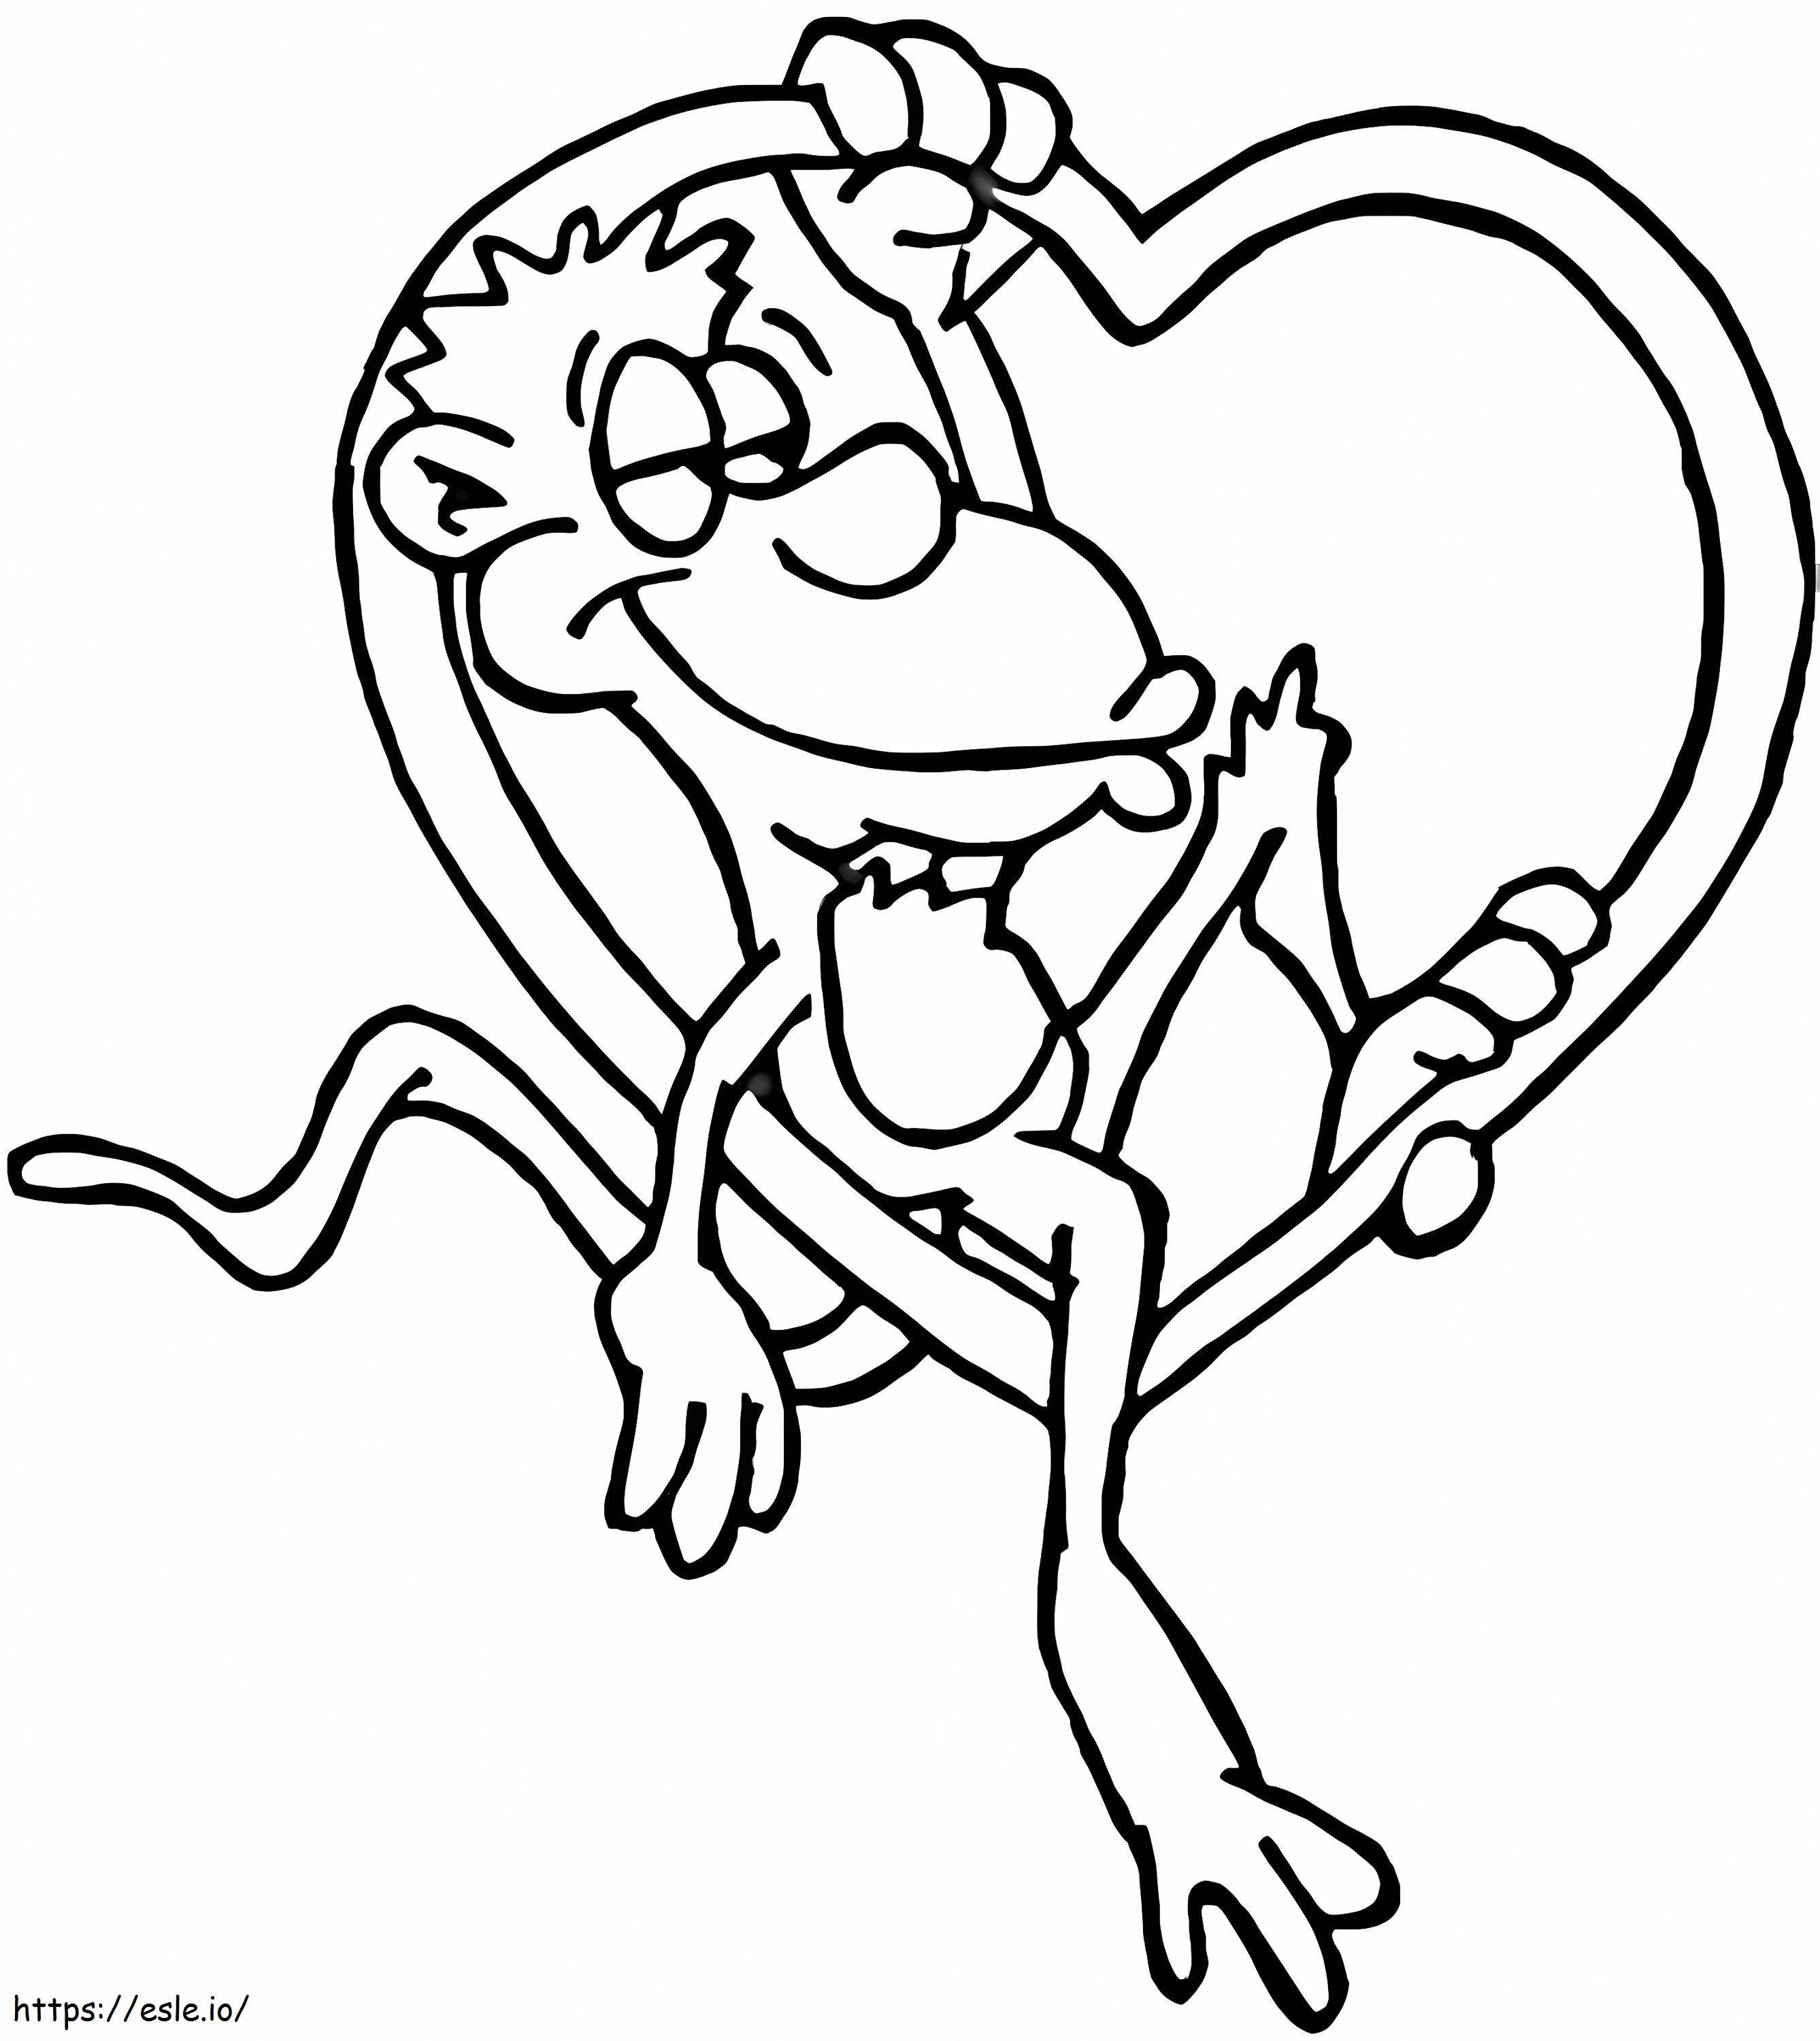 Monkey In Love coloring page